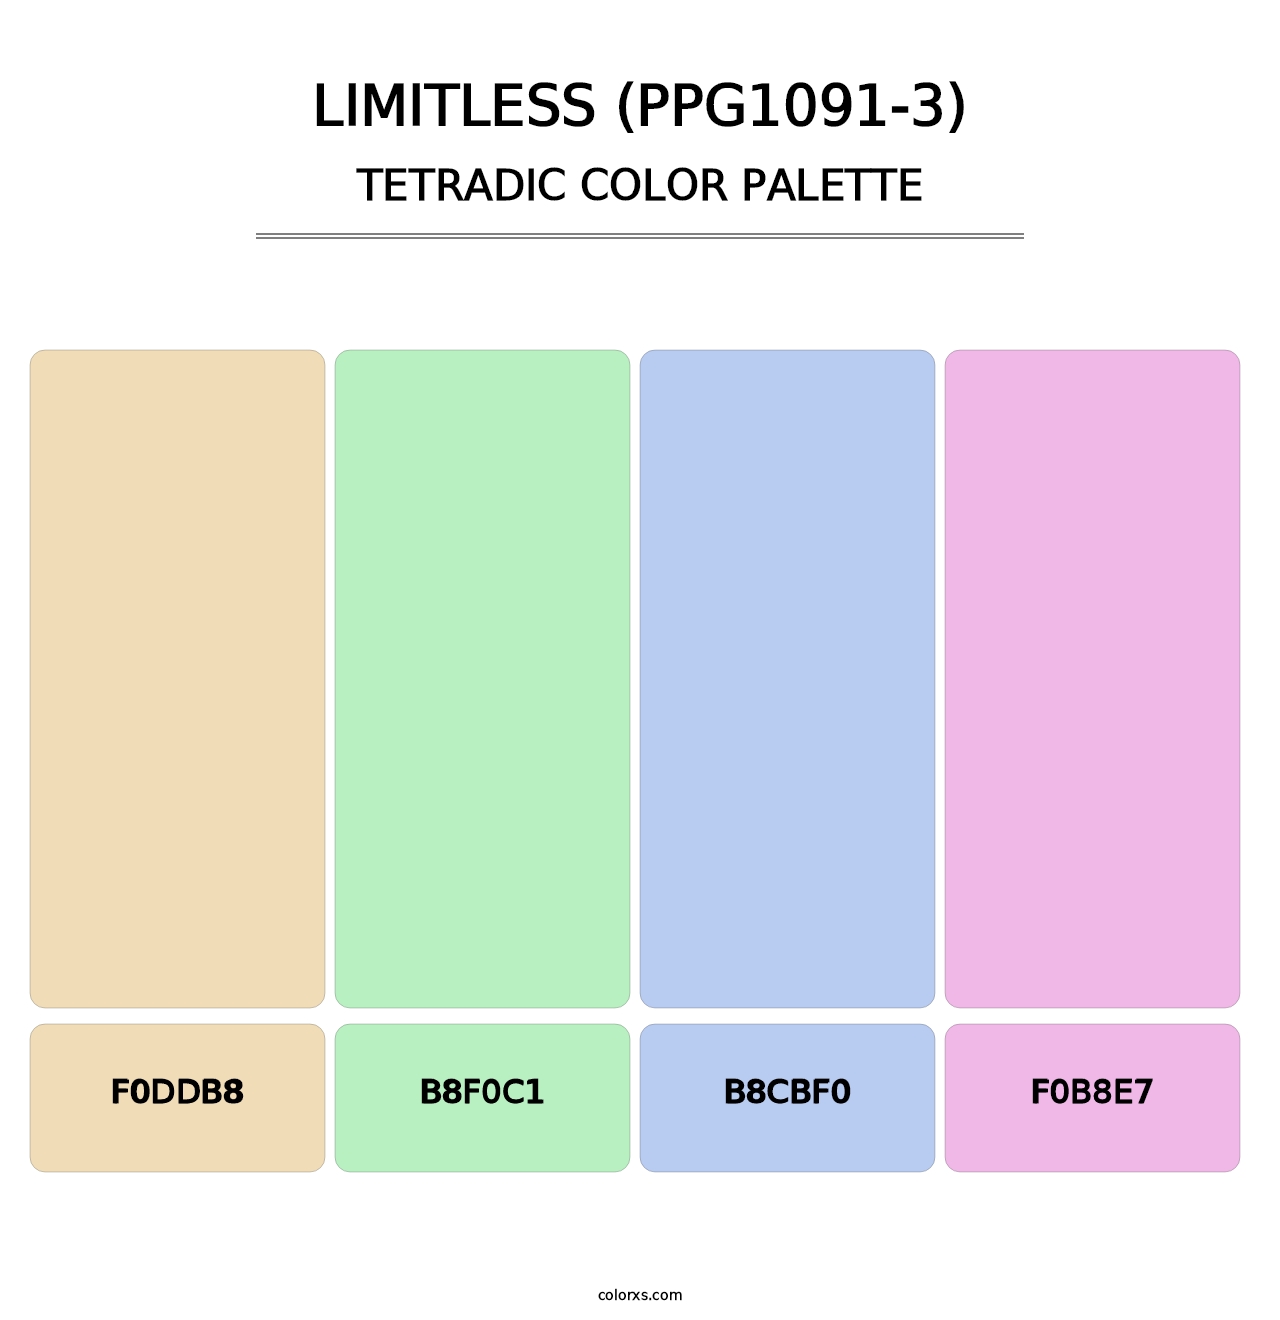 Limitless (PPG1091-3) - Tetradic Color Palette